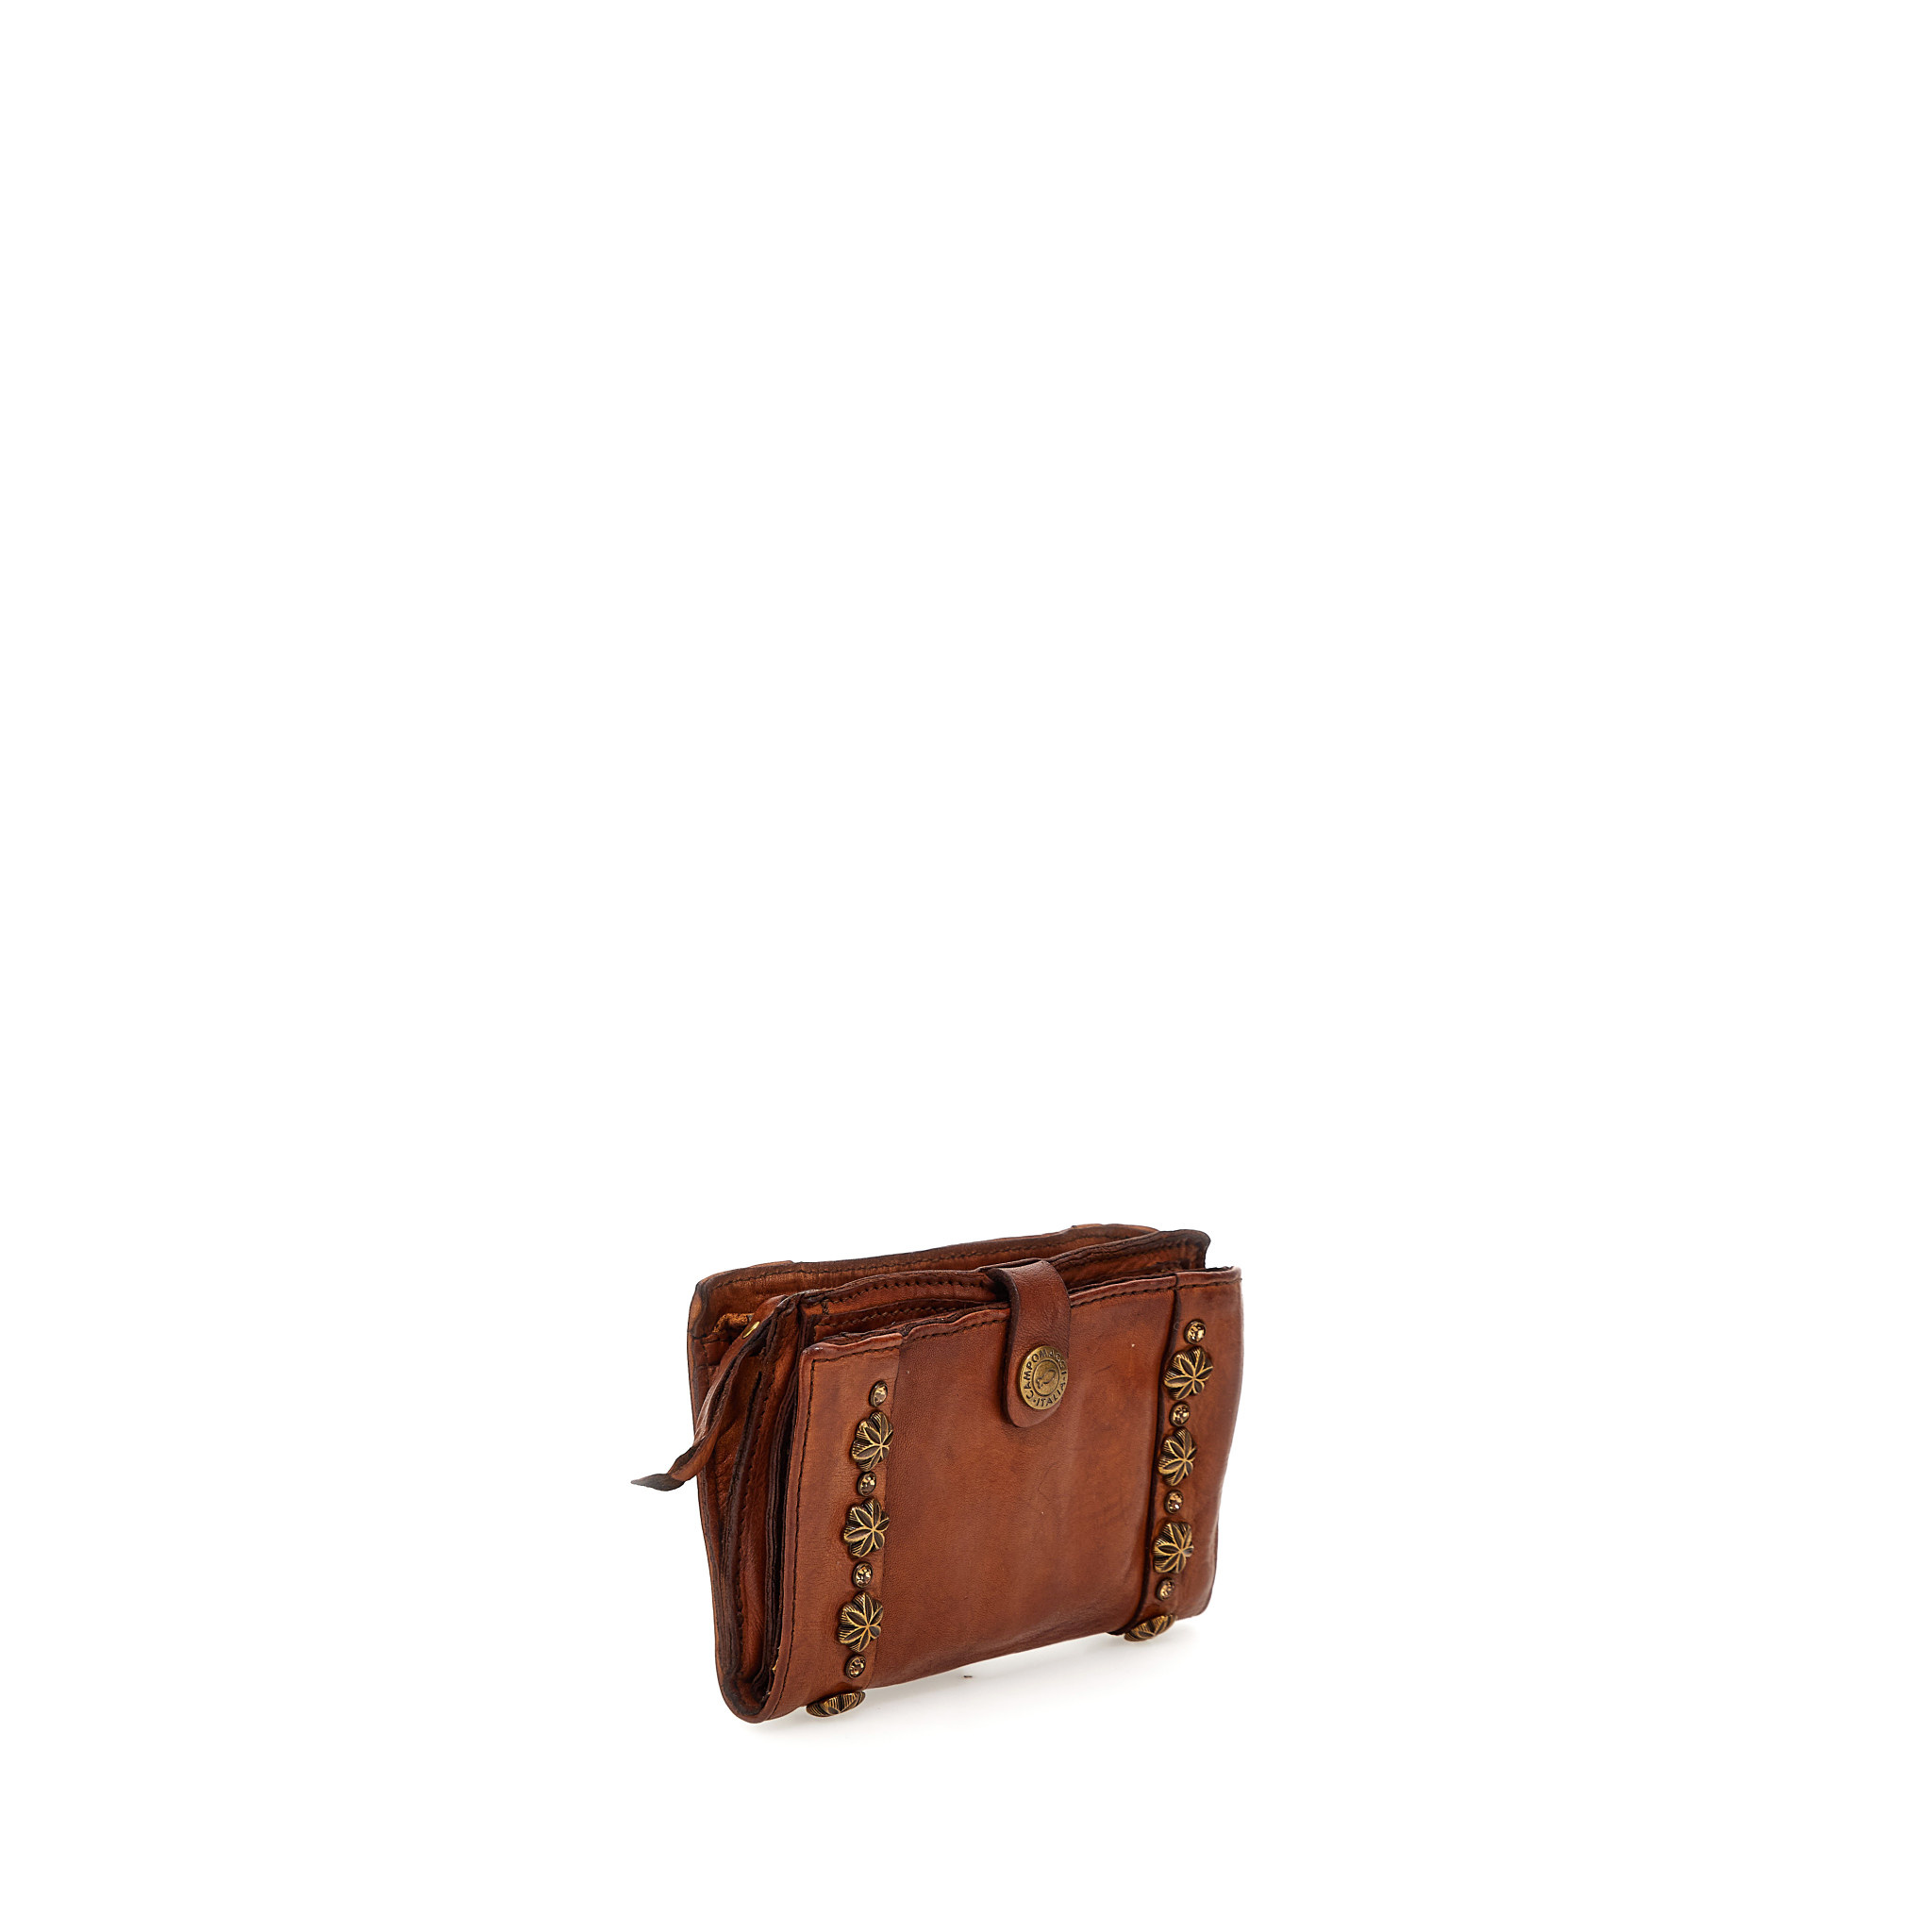 Campomaggi Wallet. Leather + Flower Studs + Strass. P/D. Cognac.